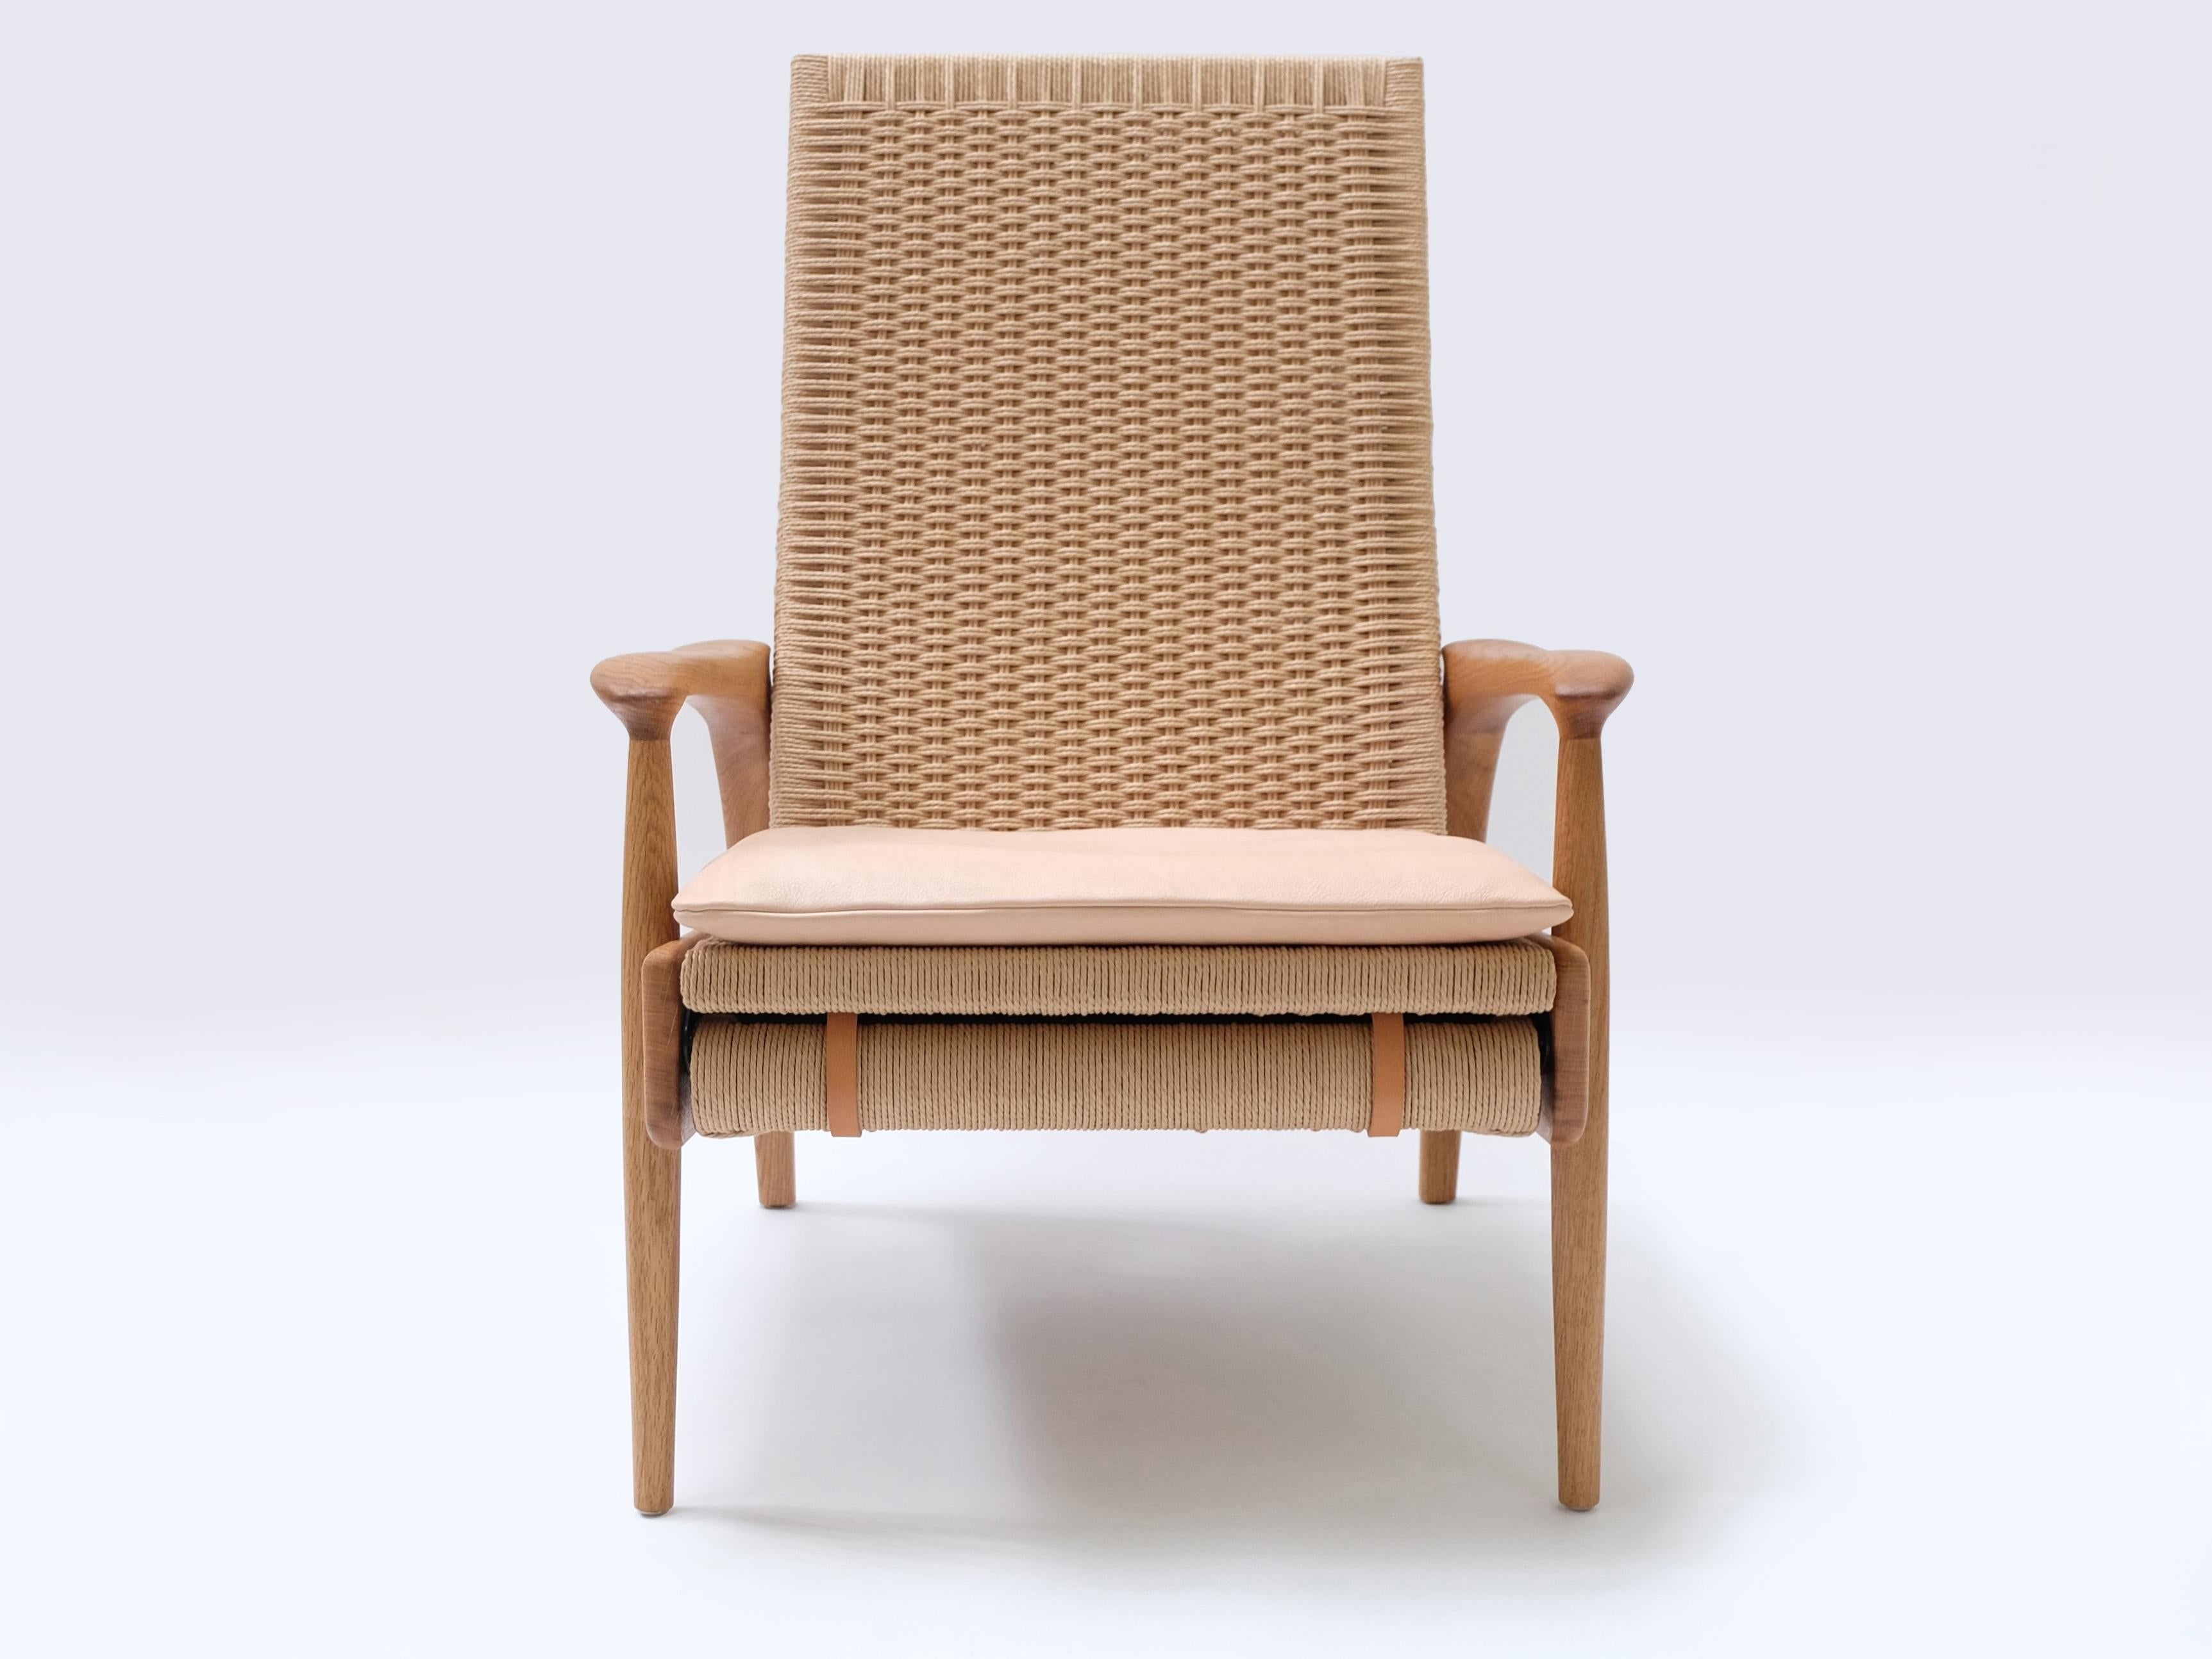 Custom-Made Handcrafted Reclining Eco Lounge Chairs FENDRIK by Studio180degree
Shown in Sustainable Solid Natural oiled Oak and Original Natural Danish Cord

Noble - Tactile – Refined - Sustainable
Reclining Eco Lounge Chair FENDRIK is a noble Eco